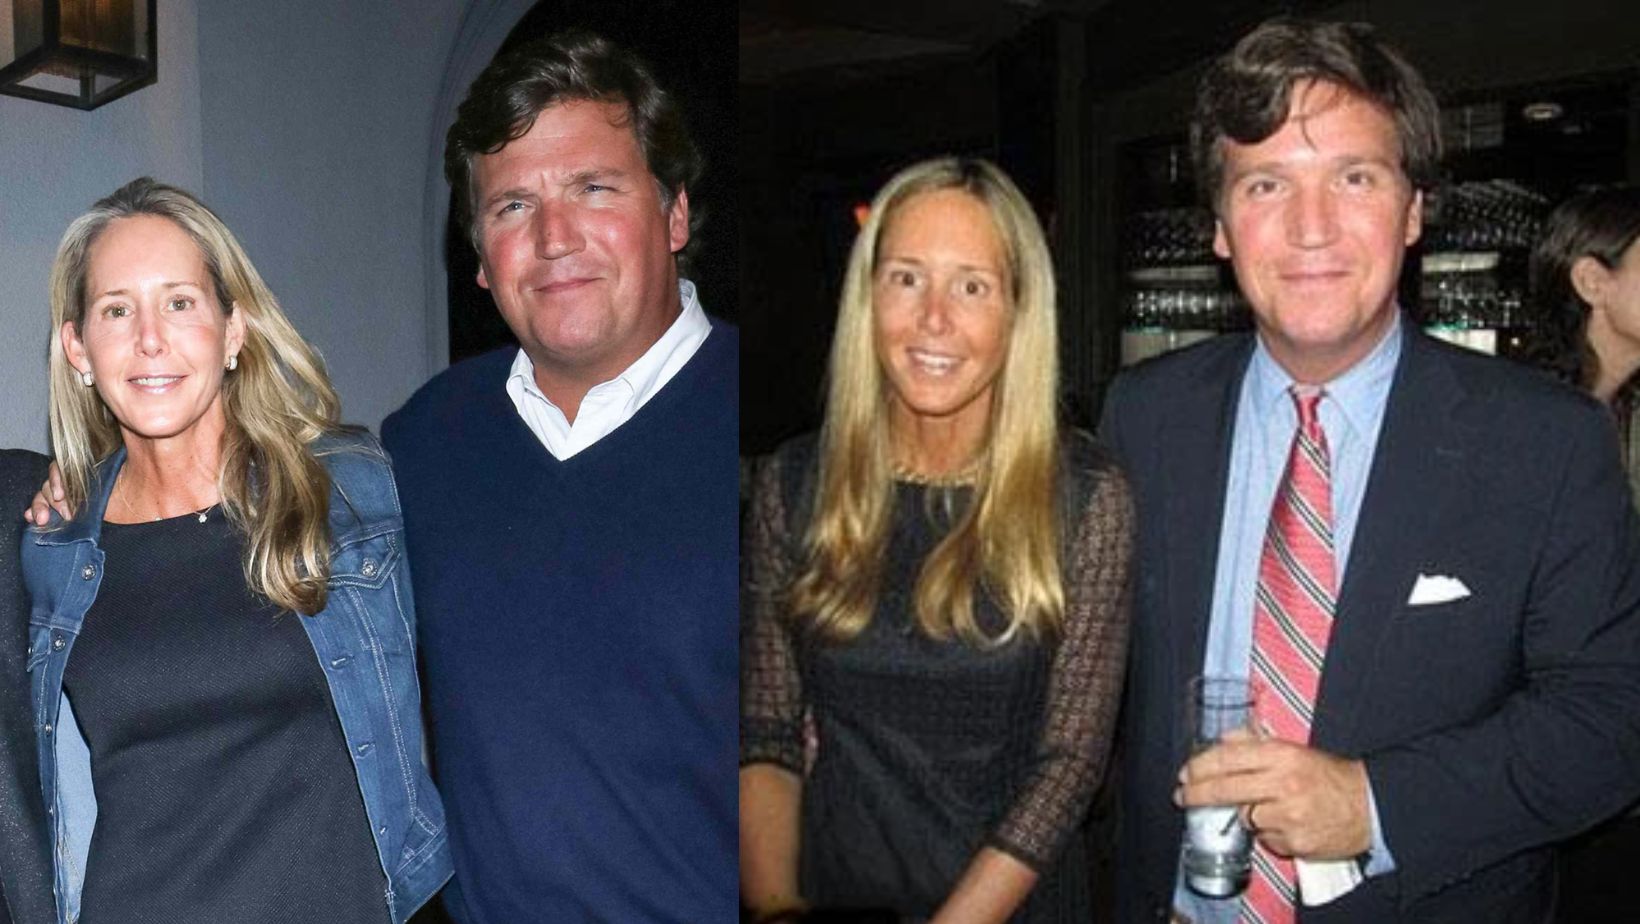 Tucker Carlson Wife: Who Is Susan Andrews?